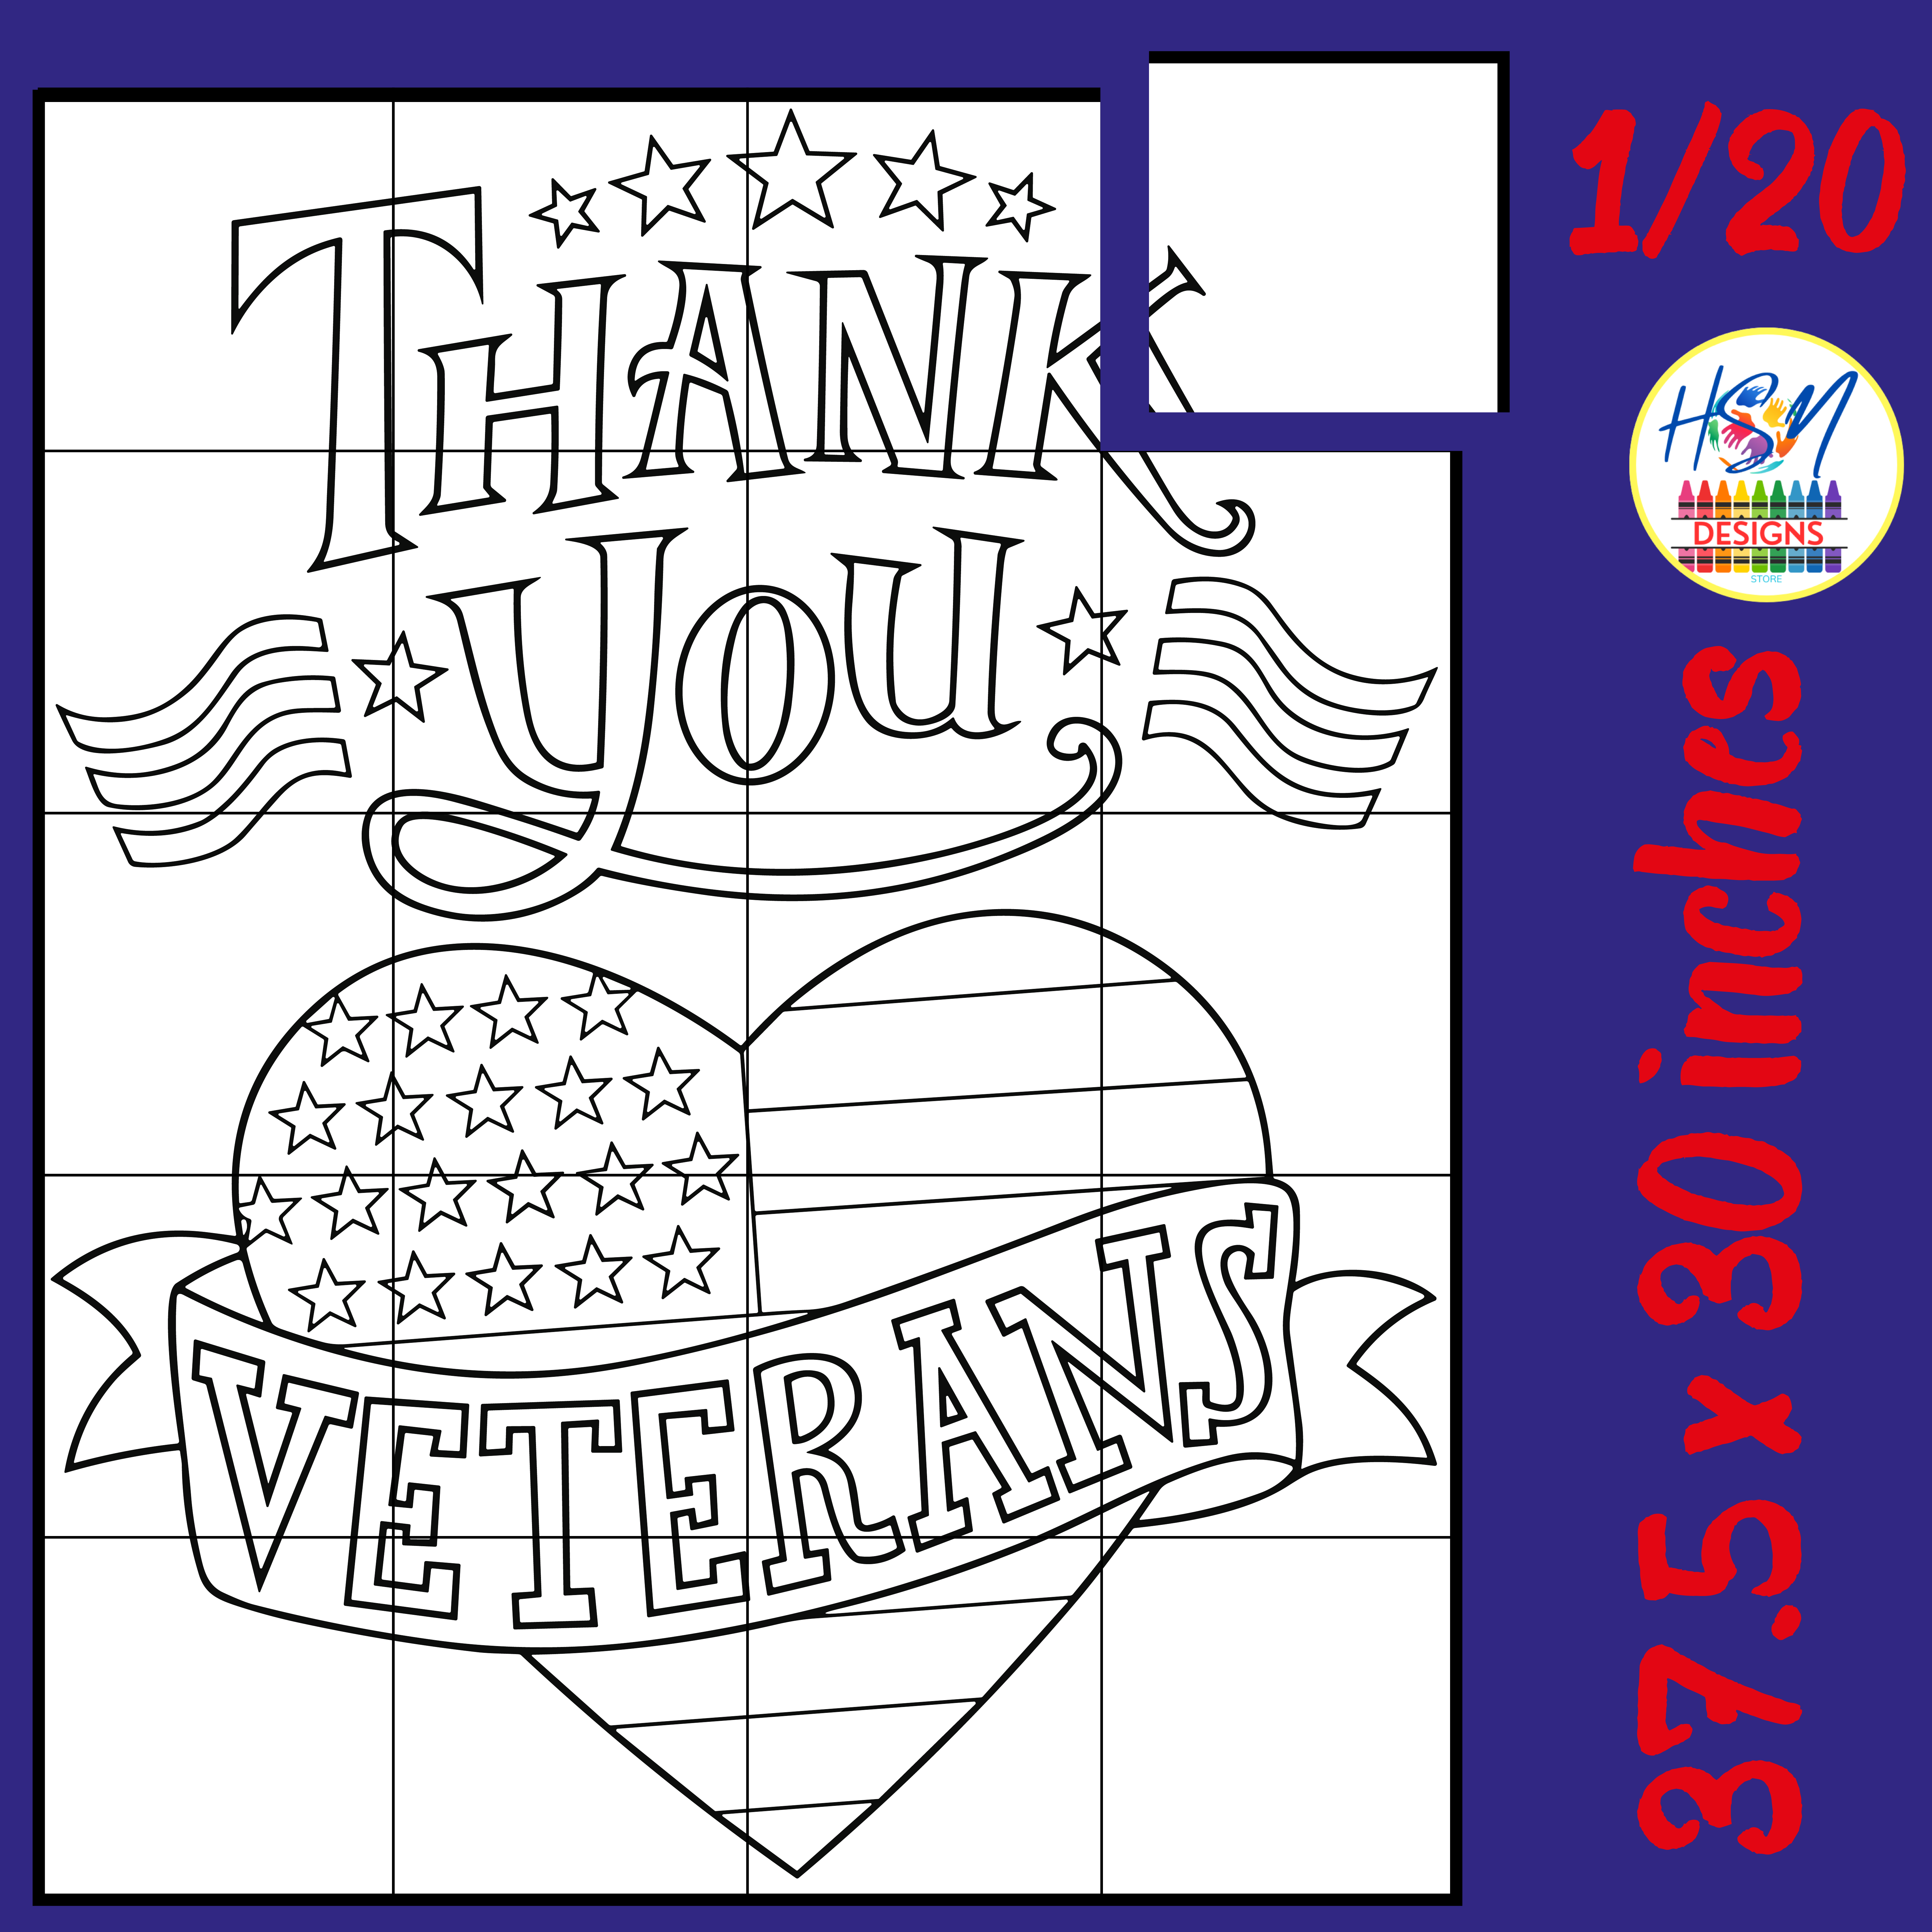 Thank you veterans day collaborative art project coloring pages bulletin board made by teachers